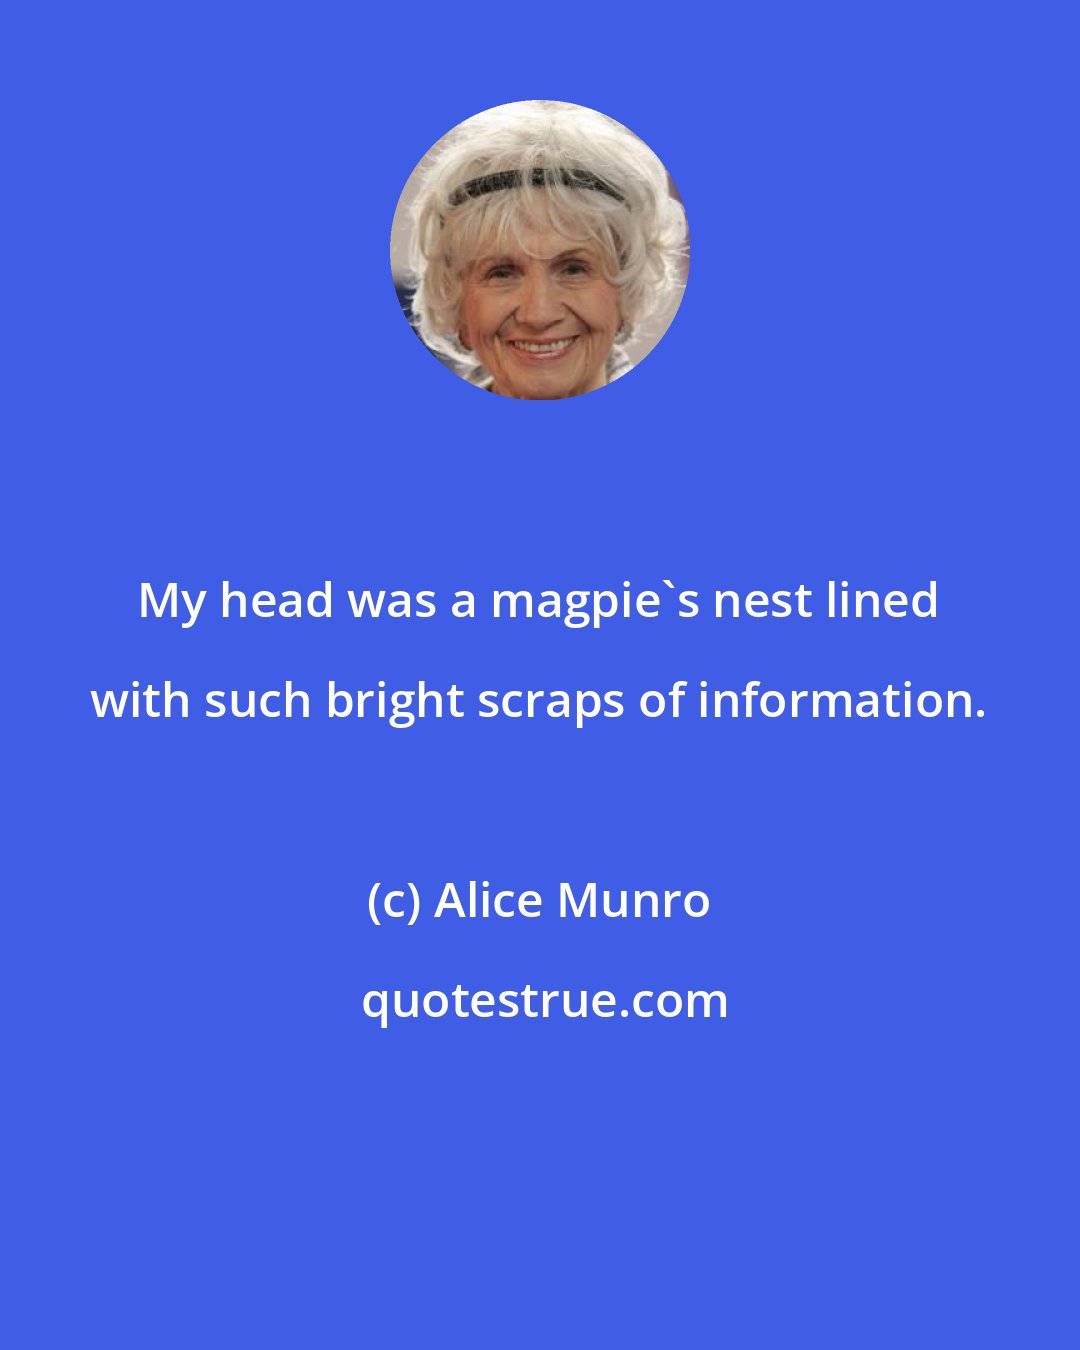 Alice Munro: My head was a magpie's nest lined with such bright scraps of information.